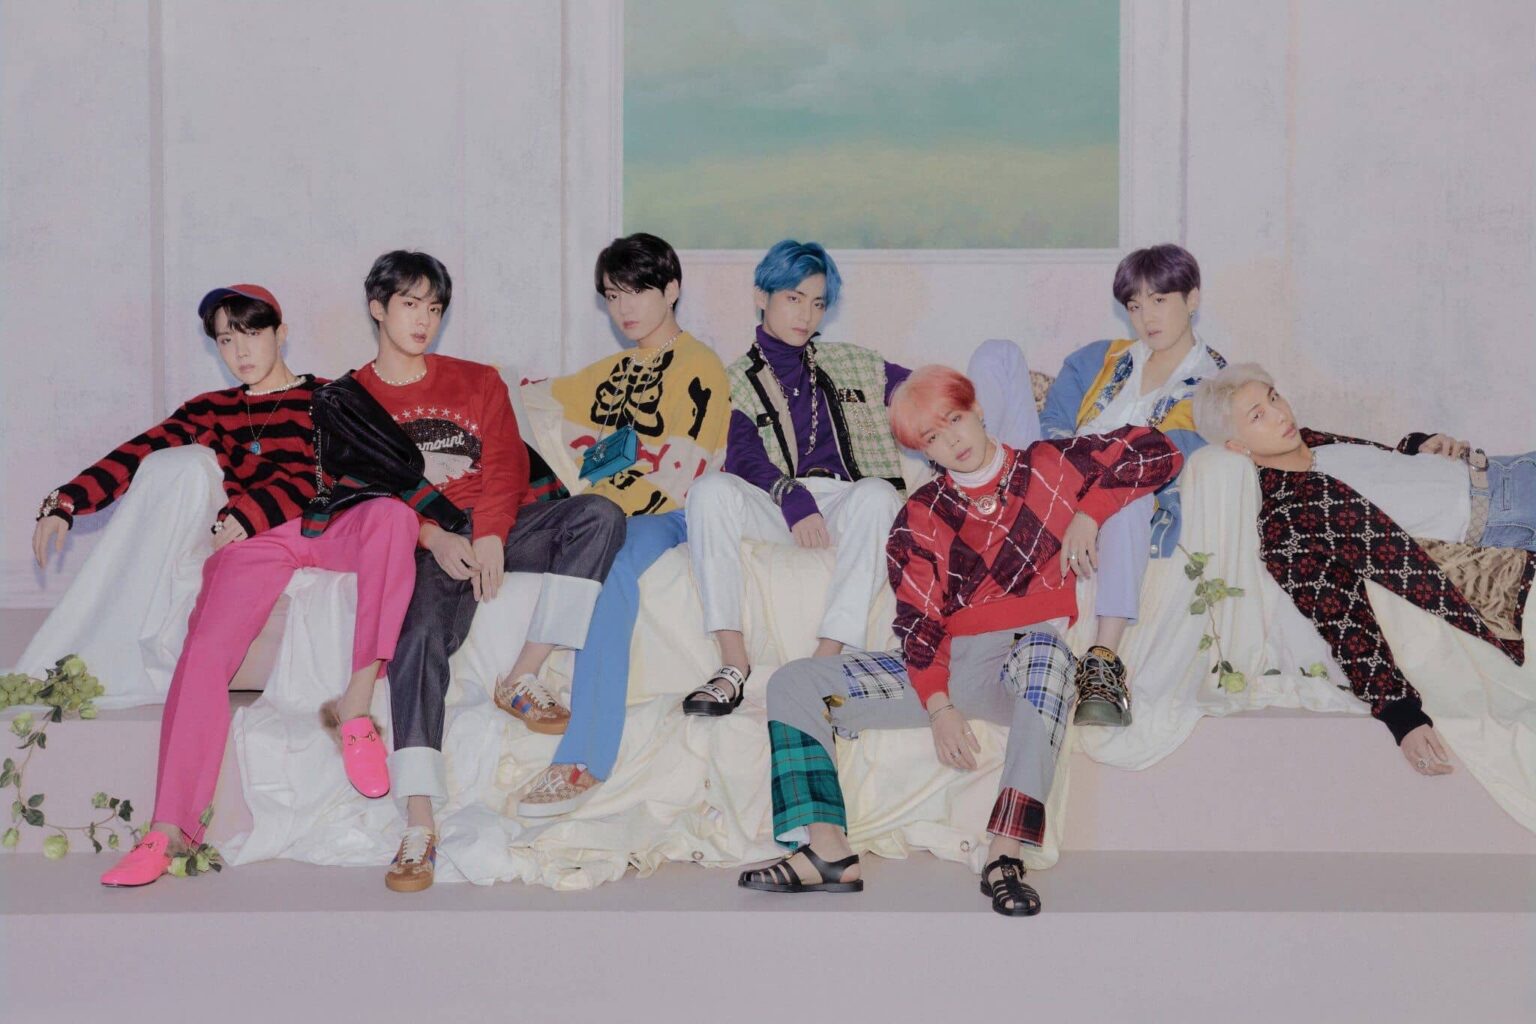 BTS is ramping up for the release of their new album. Find out what the ARMY has to say about their concept photos.